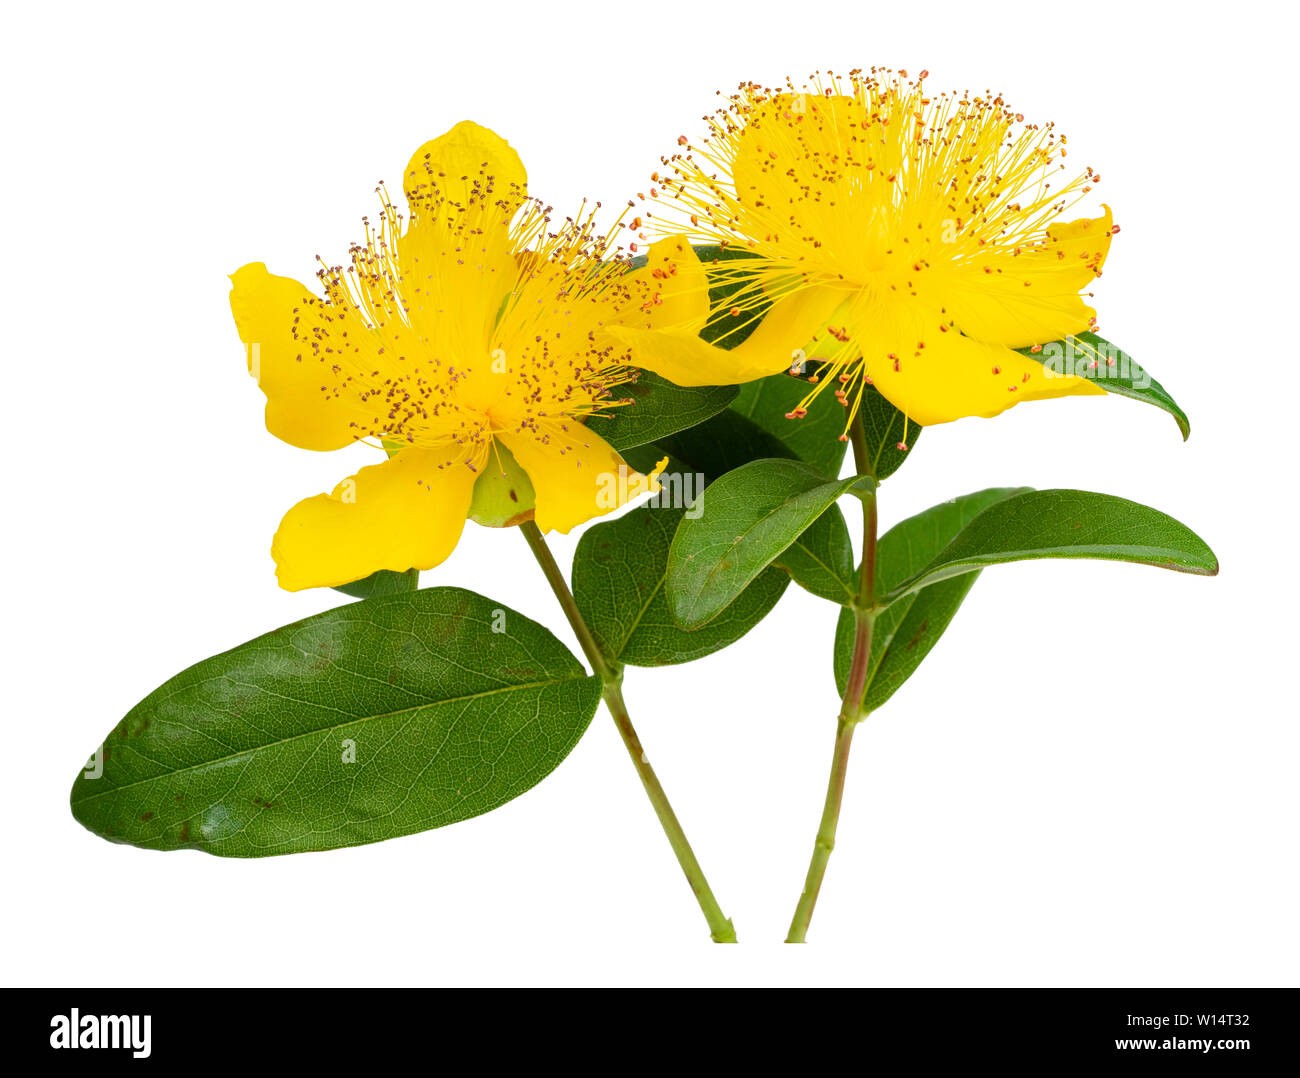 Yellow boss of stamens and yellow petals of the Rose of Sharon, Hypericum calycinum, on a white background Stock Photo